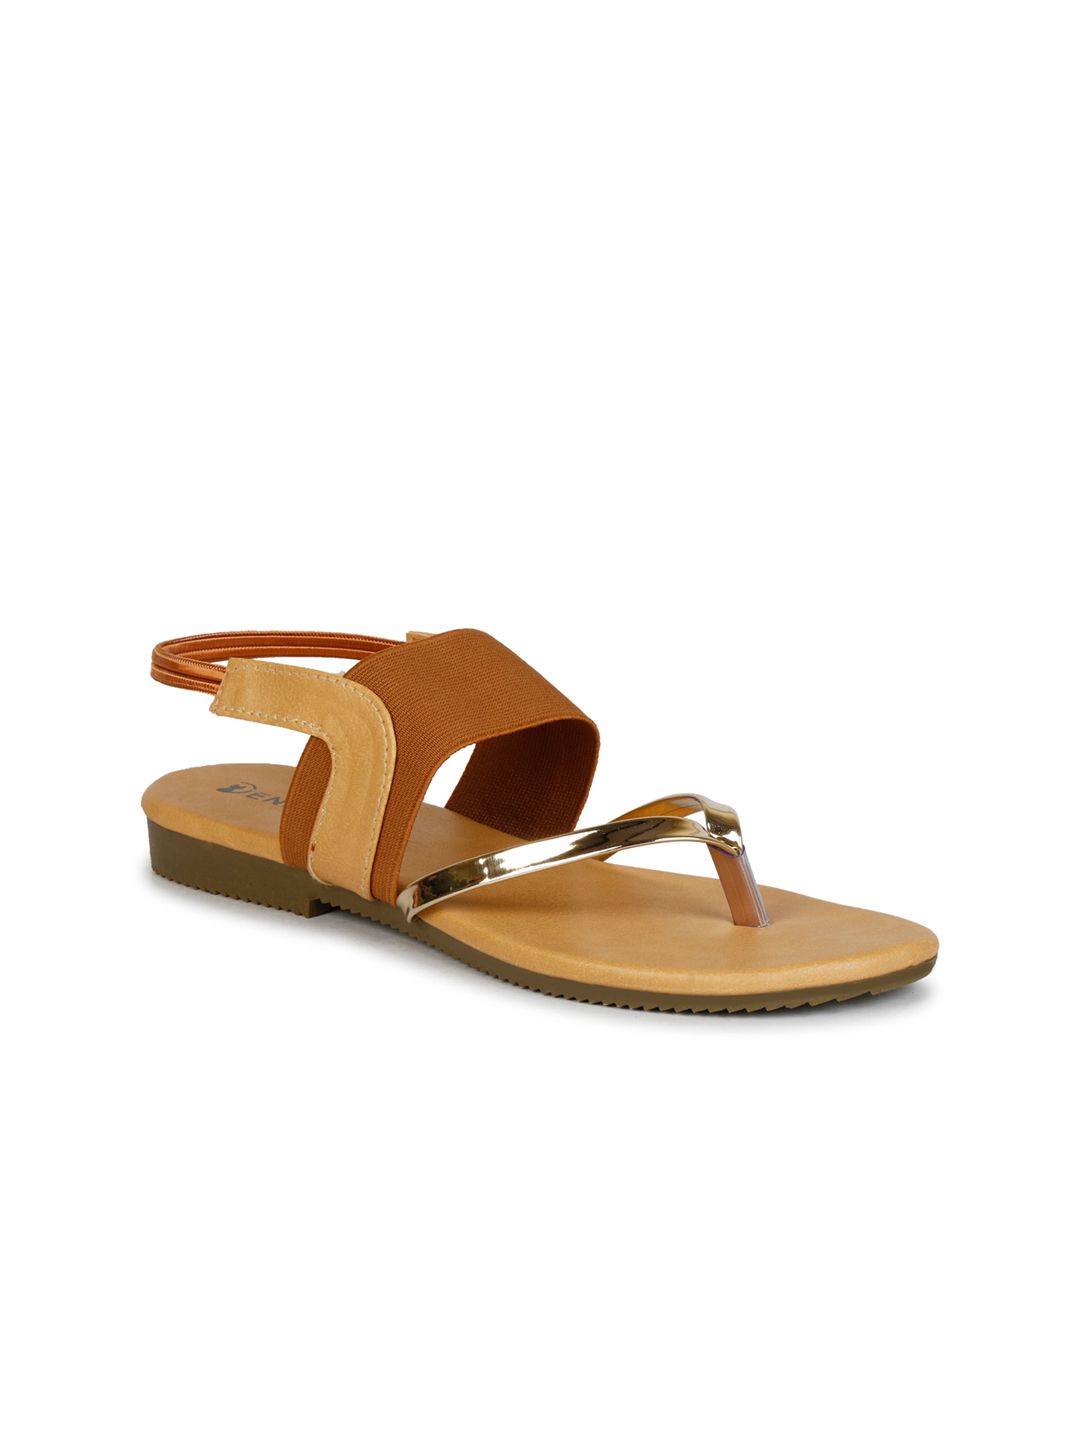 Denill Women Tan & Gold Solid T-Strap Flats Price in India